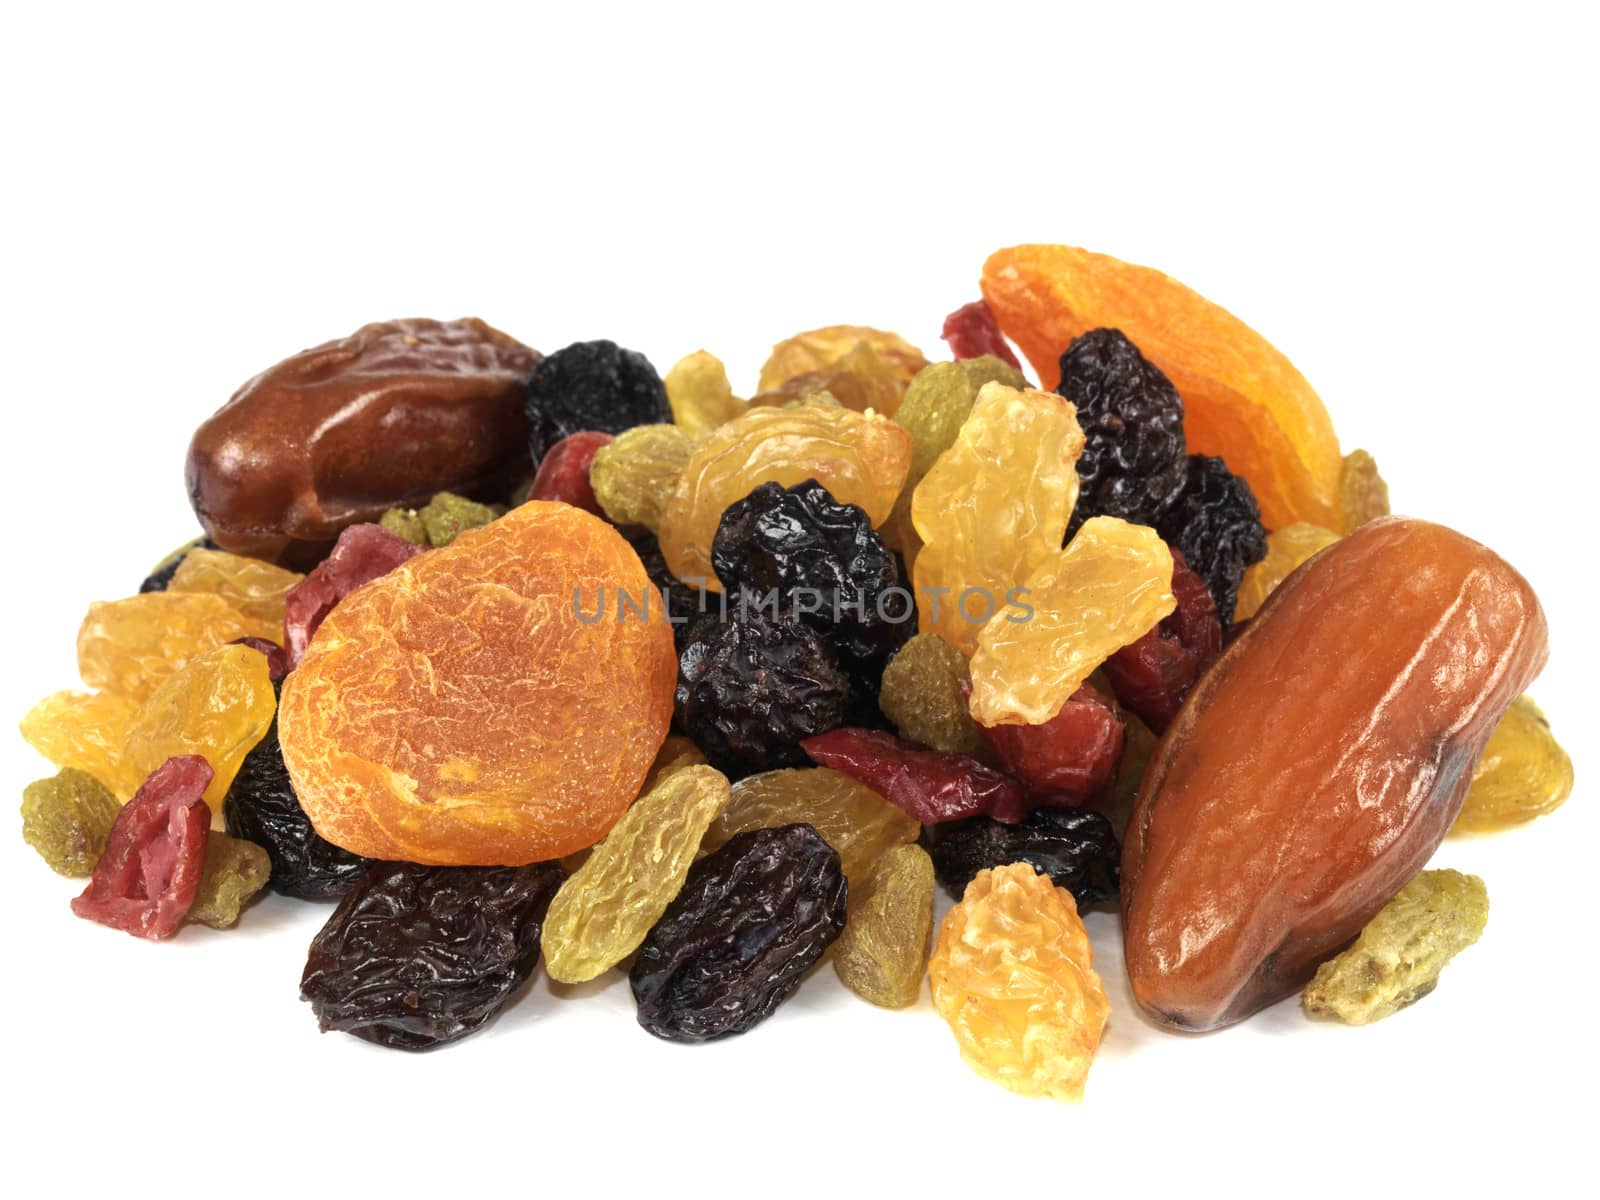 Dried Mixed Fruit by Whiteboxmedia